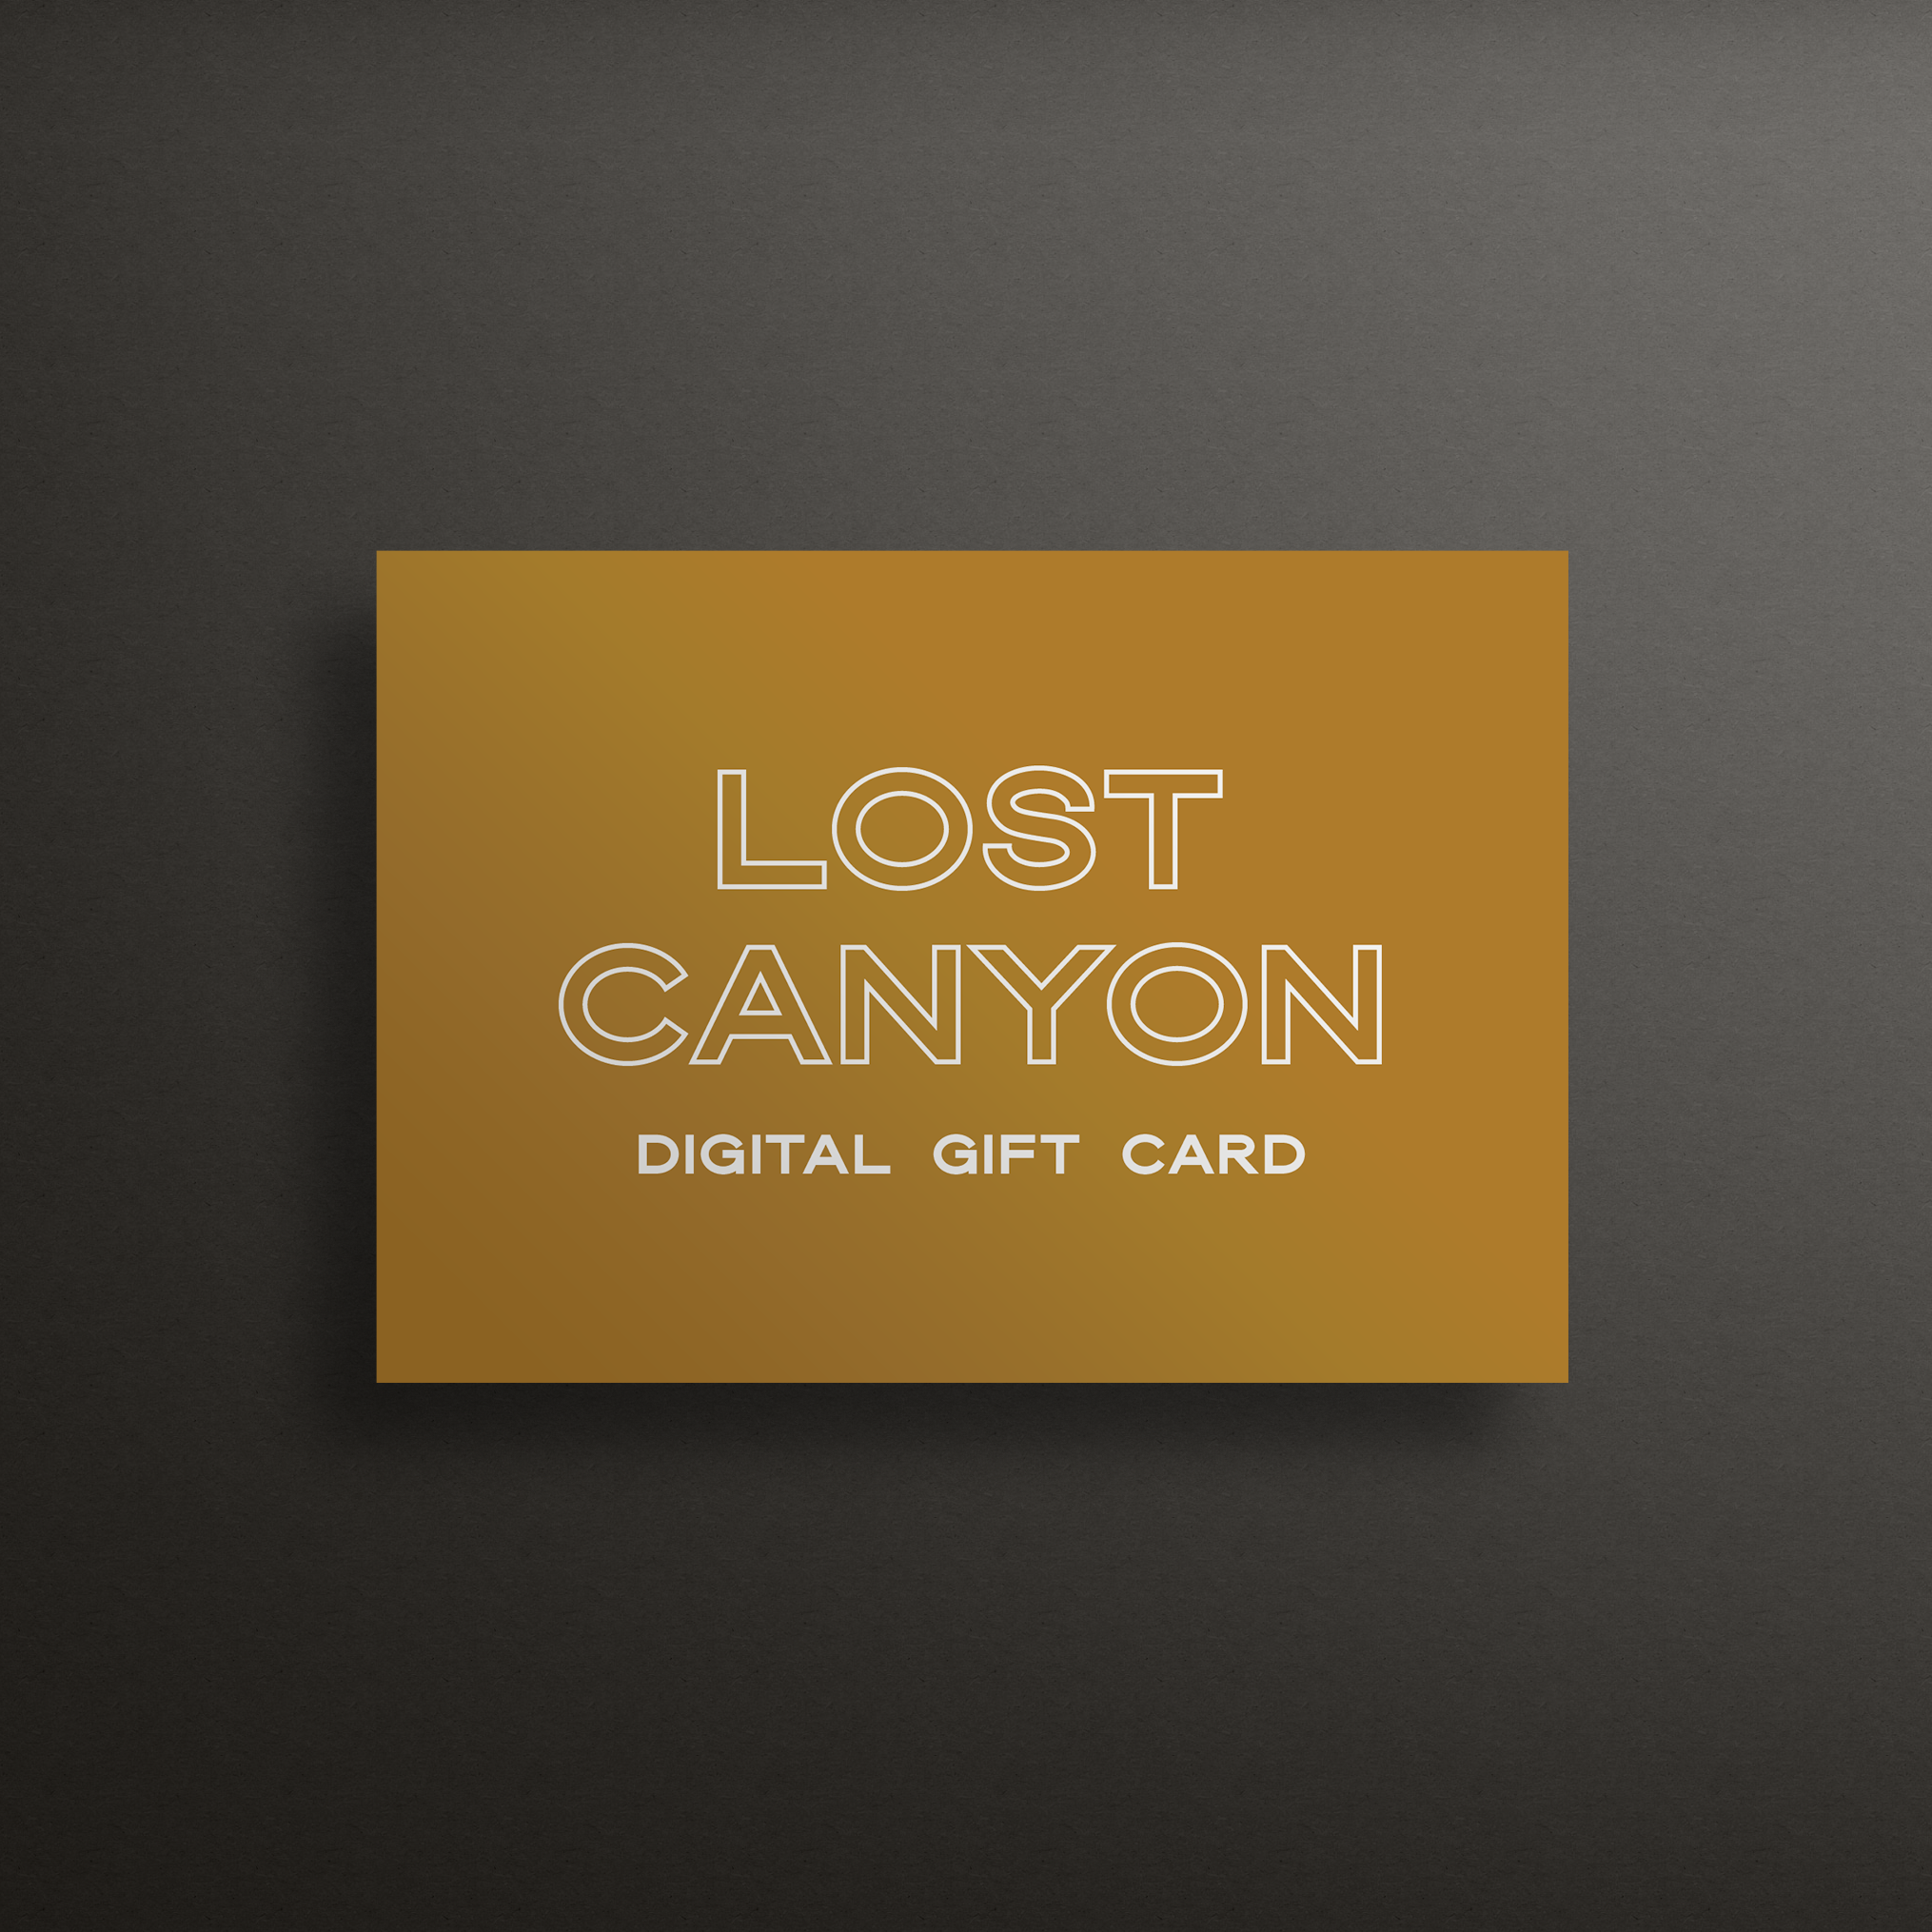 An image of a yellow square floating over a dark gray background. On the yellow square are the words "Lost Canyon - Digital Gift Cards"